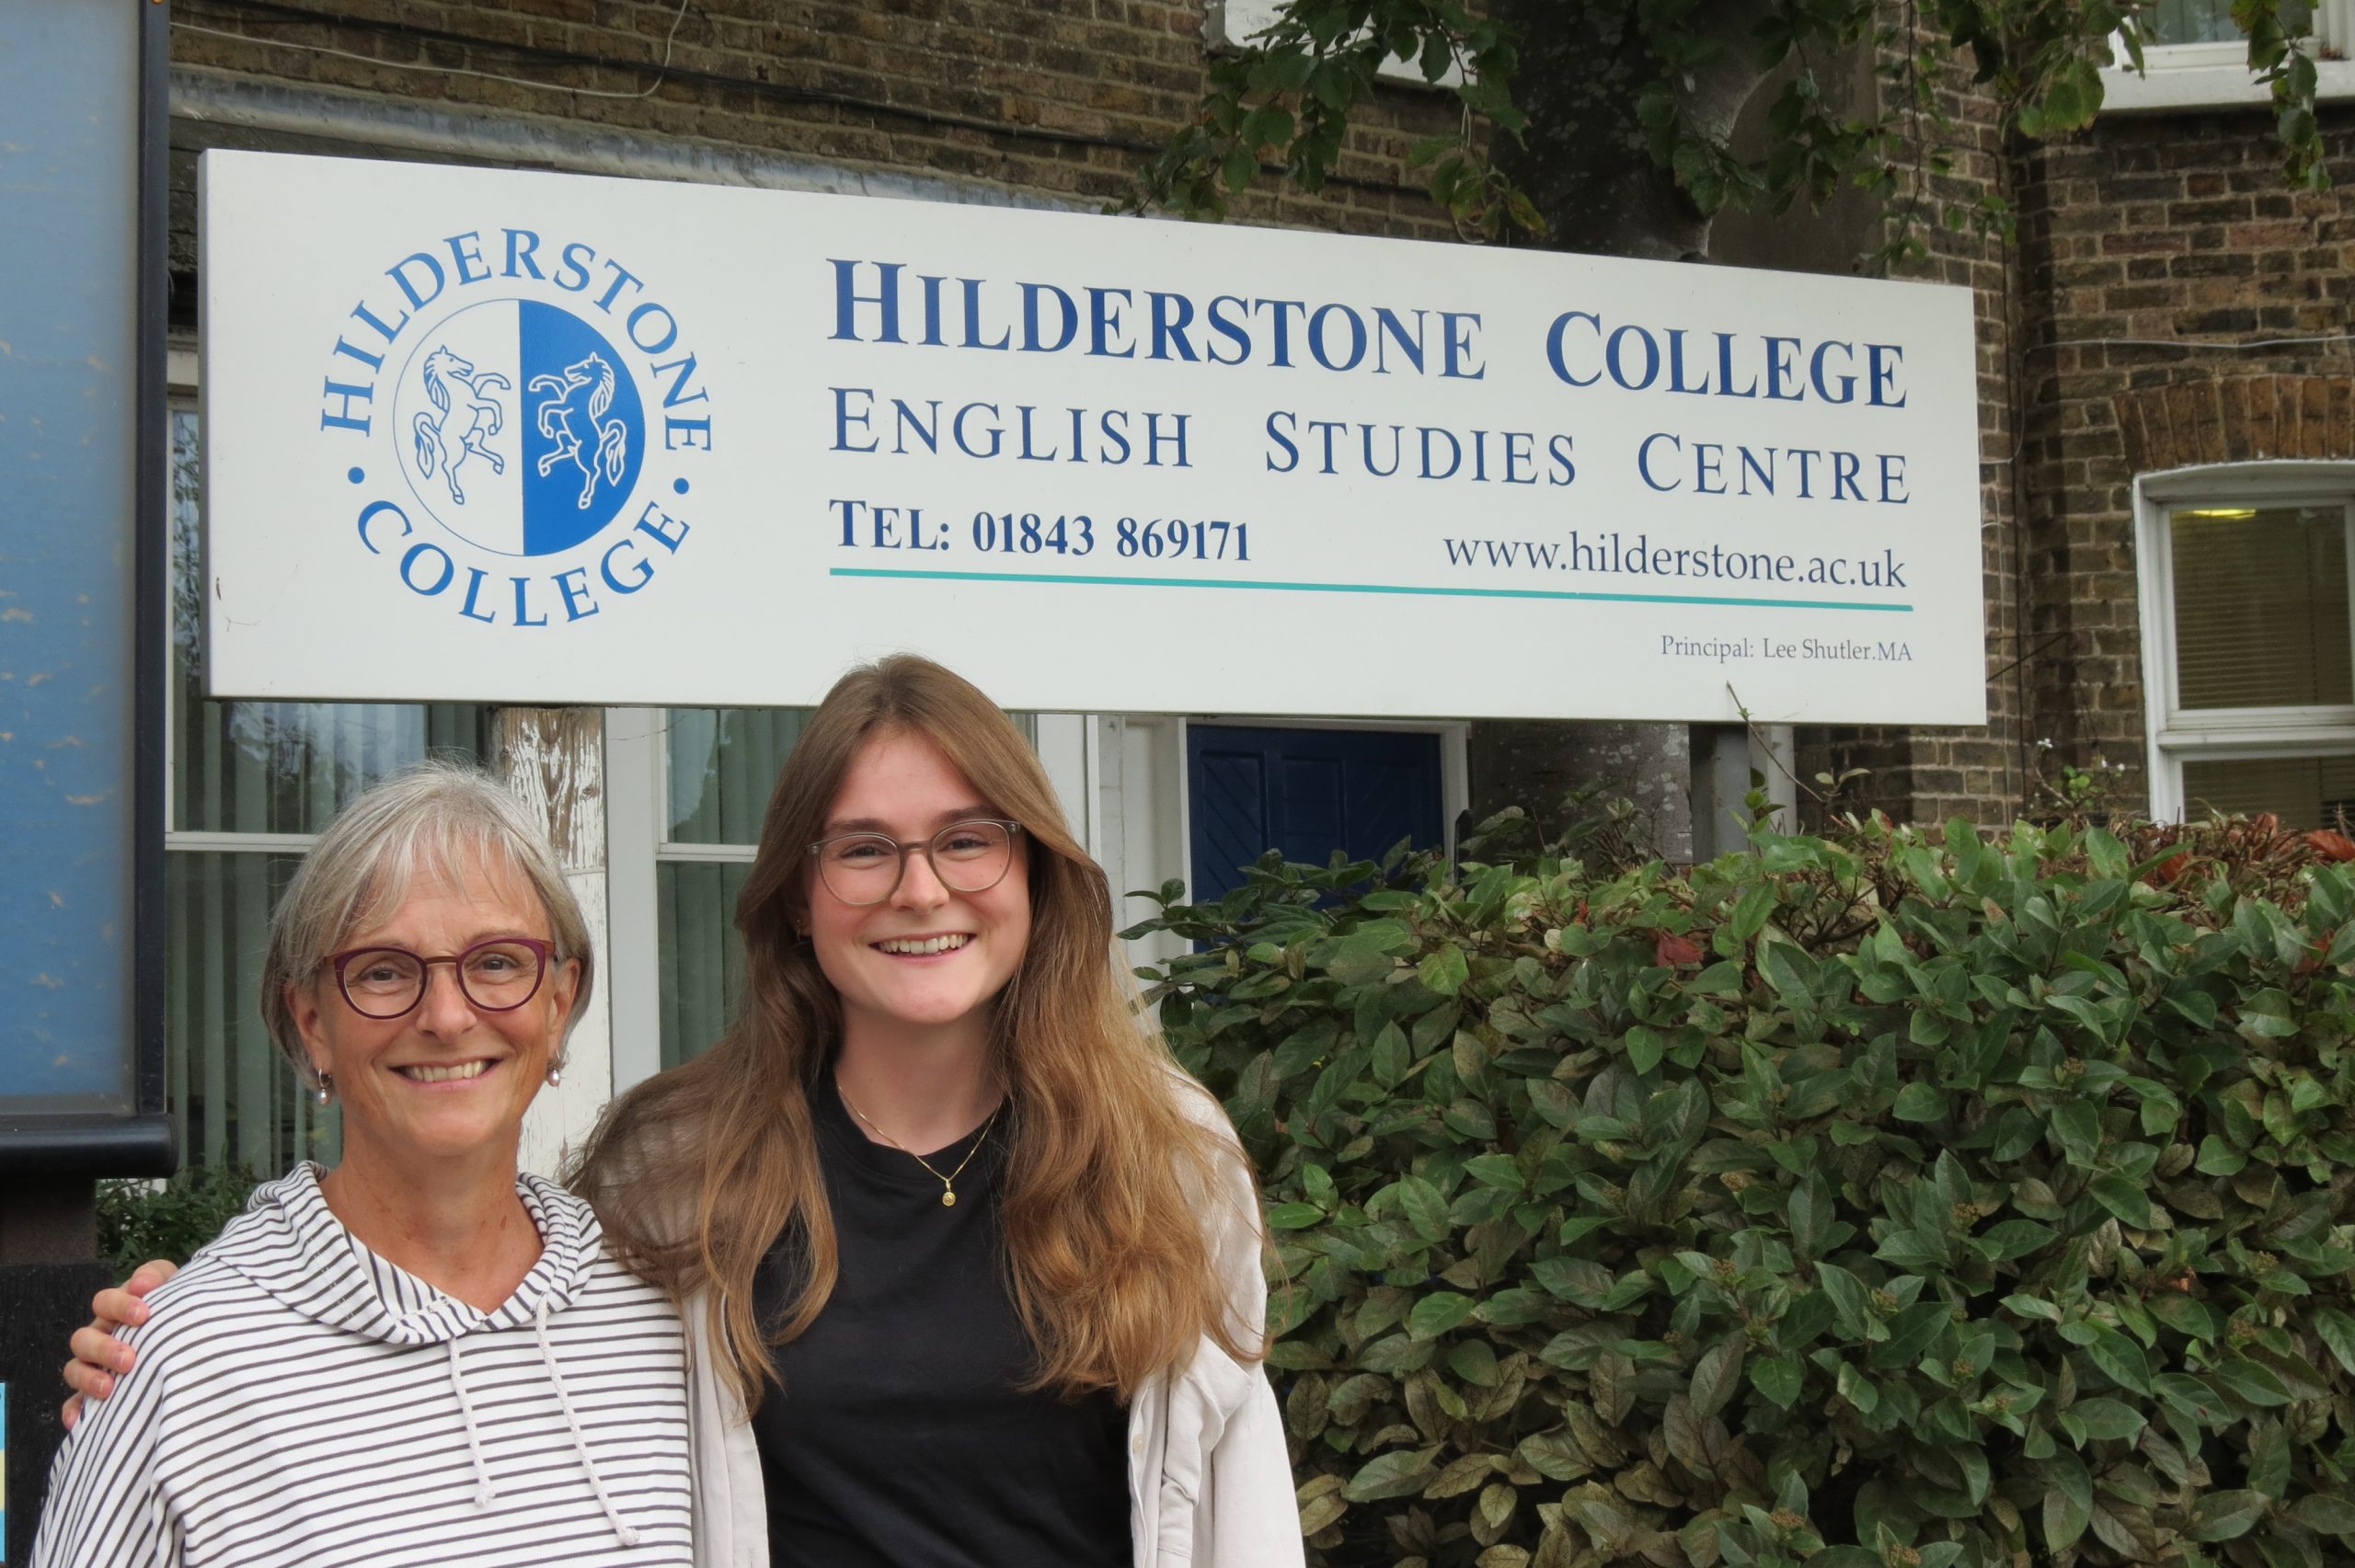 Hilderstone College - Daughter follows in her mother's footsteps to Hilderstone!